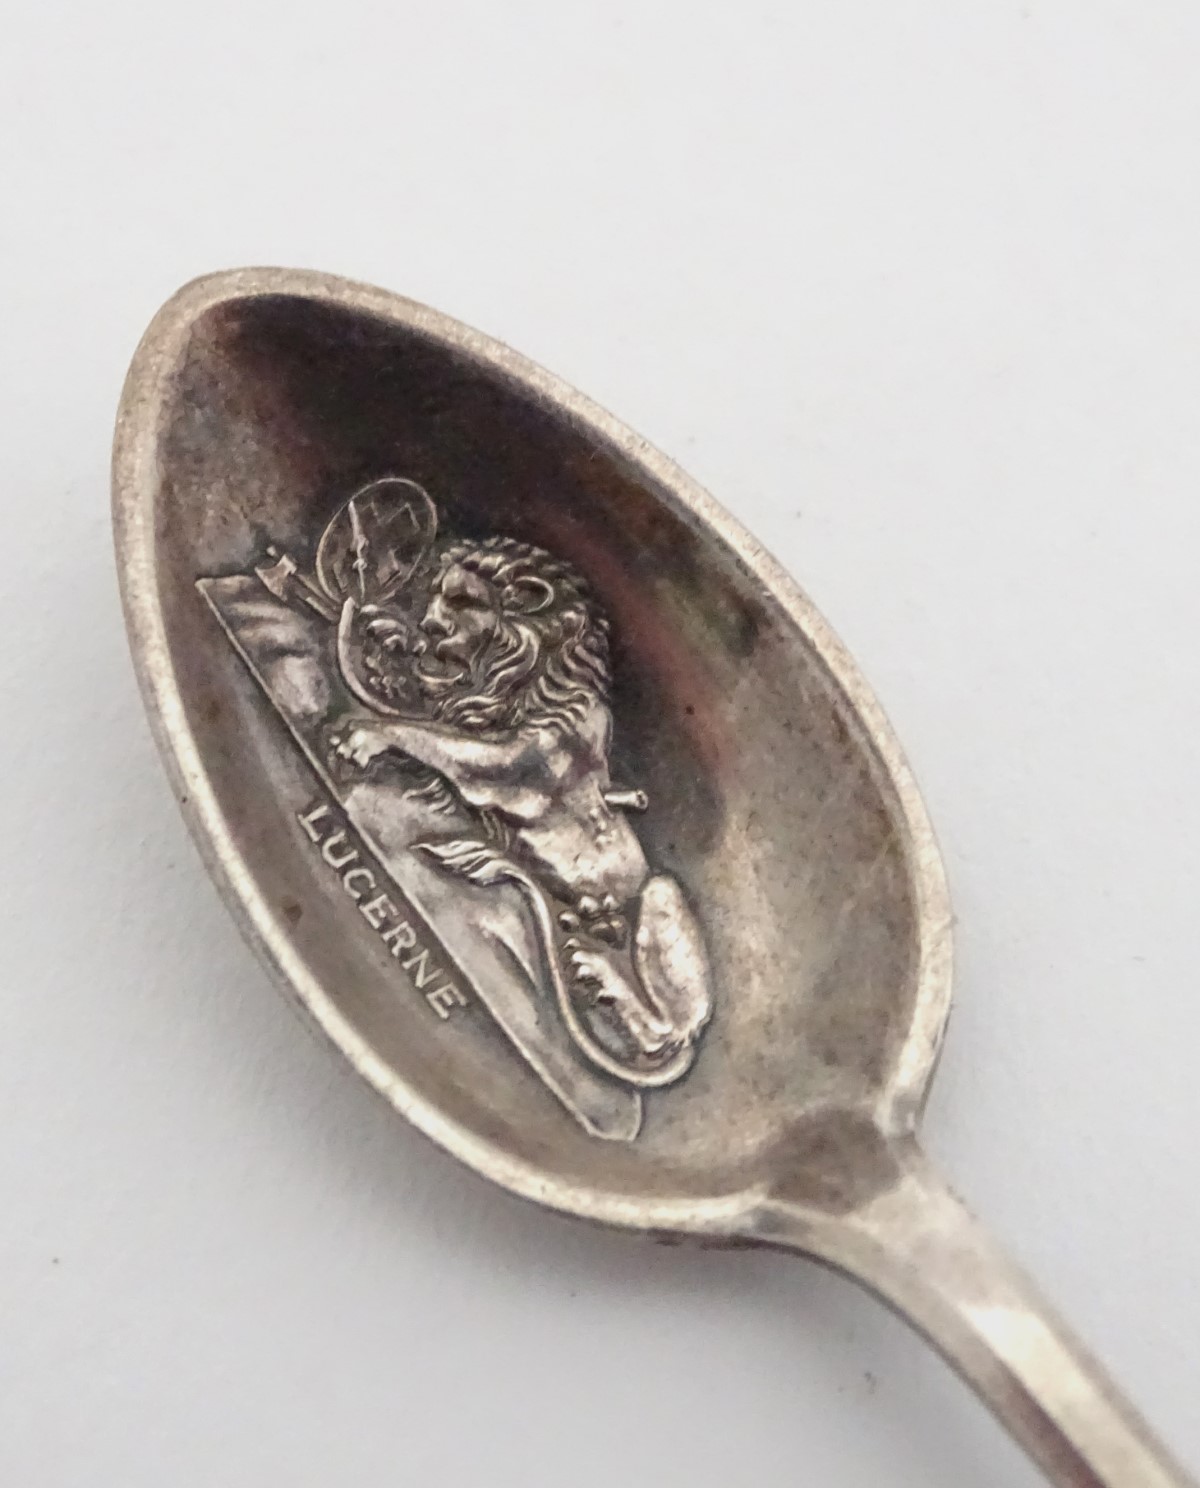 3 silver plated advertising spoons for Bucherer Watches, - Image 3 of 7